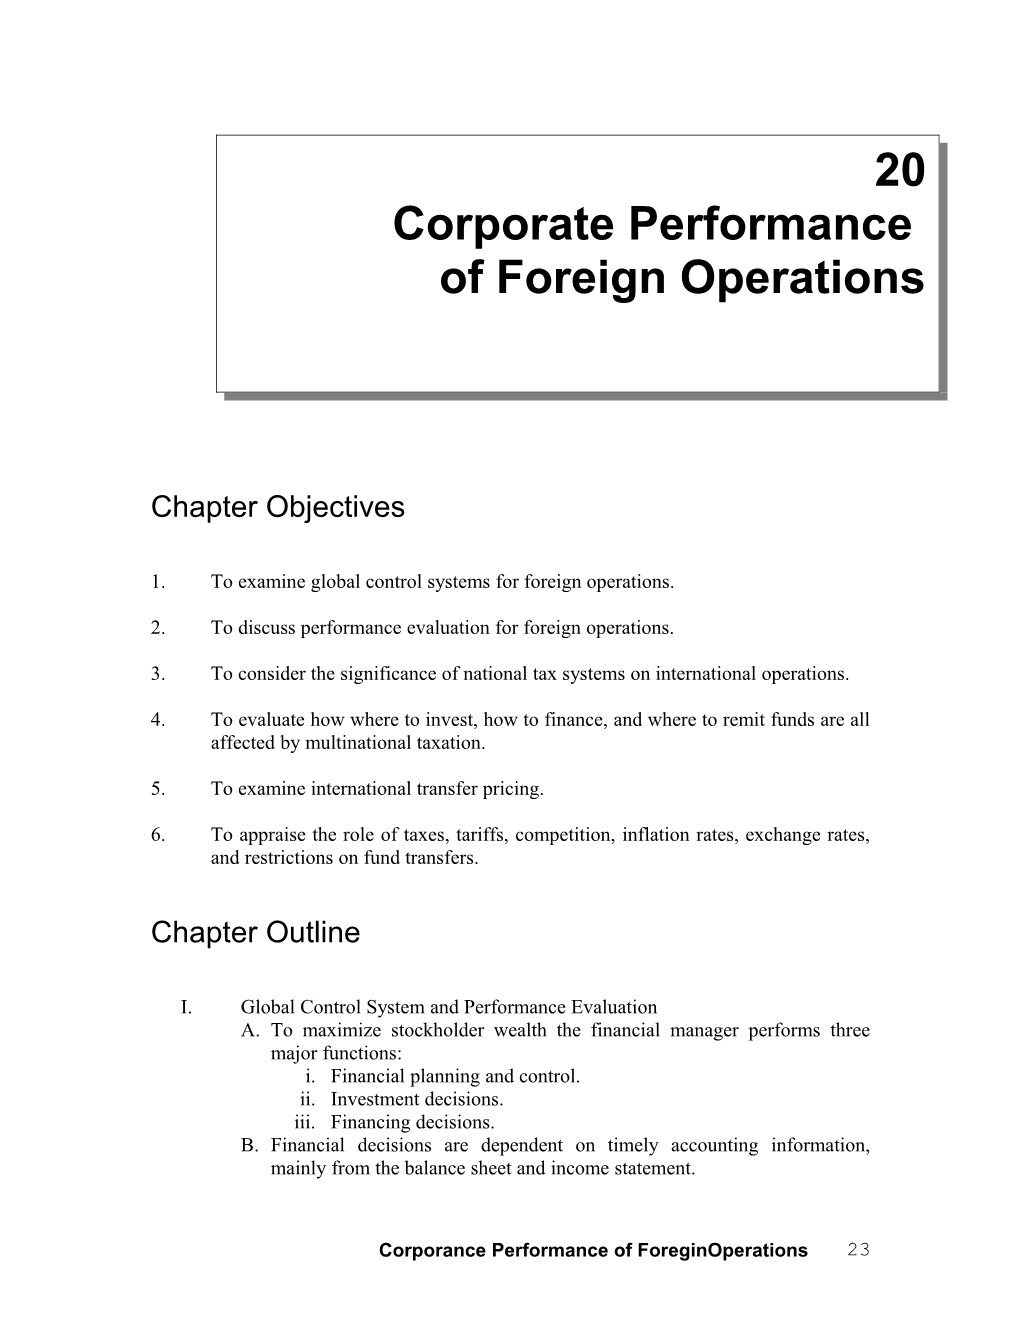 1. to Examine Global Control Systems for Foreign Operations